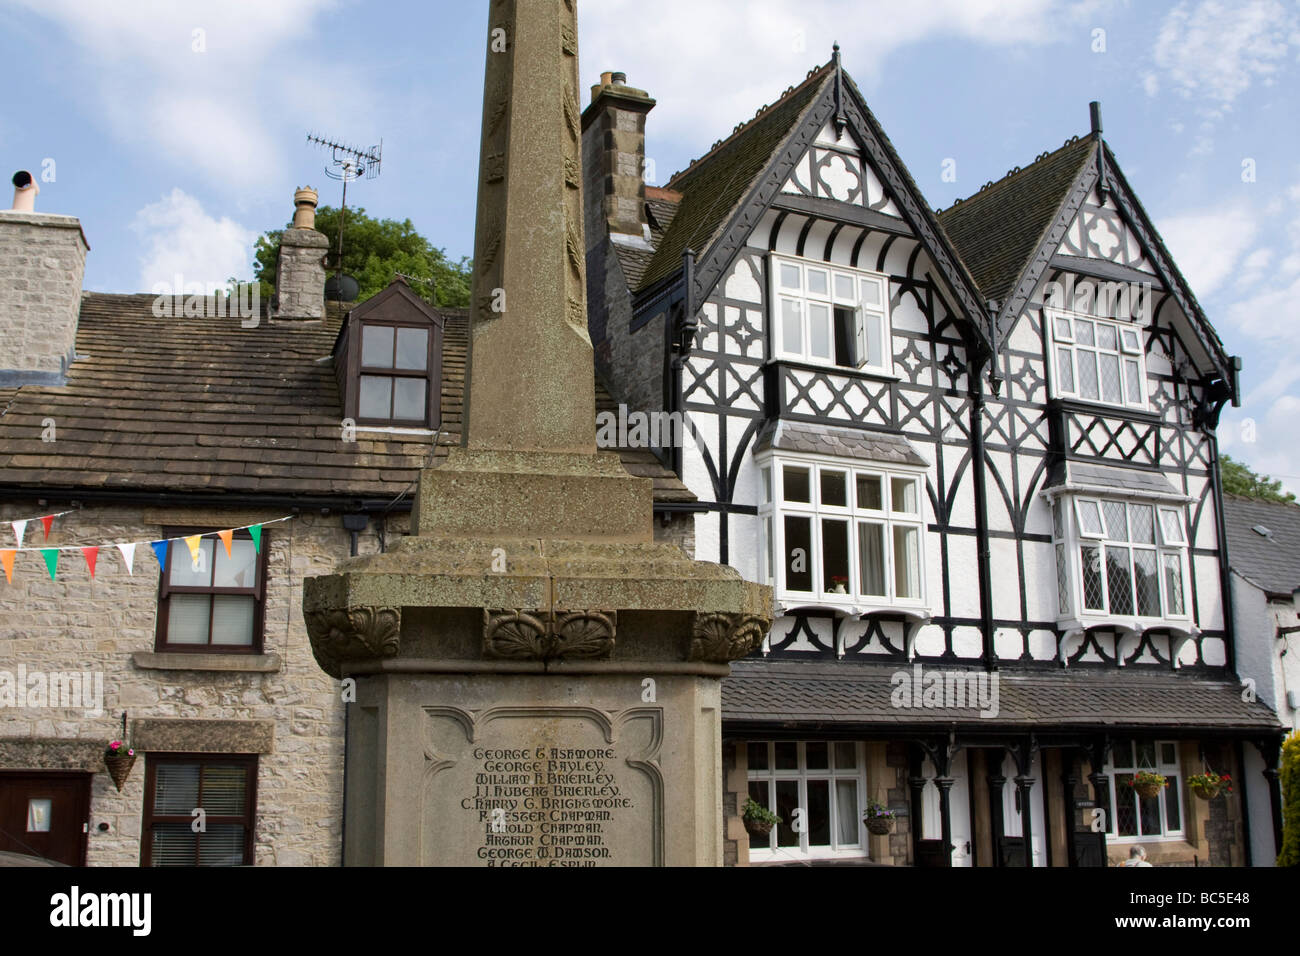 Tideswell is a village in the Derbyshire Peak District, England. Stock Photo